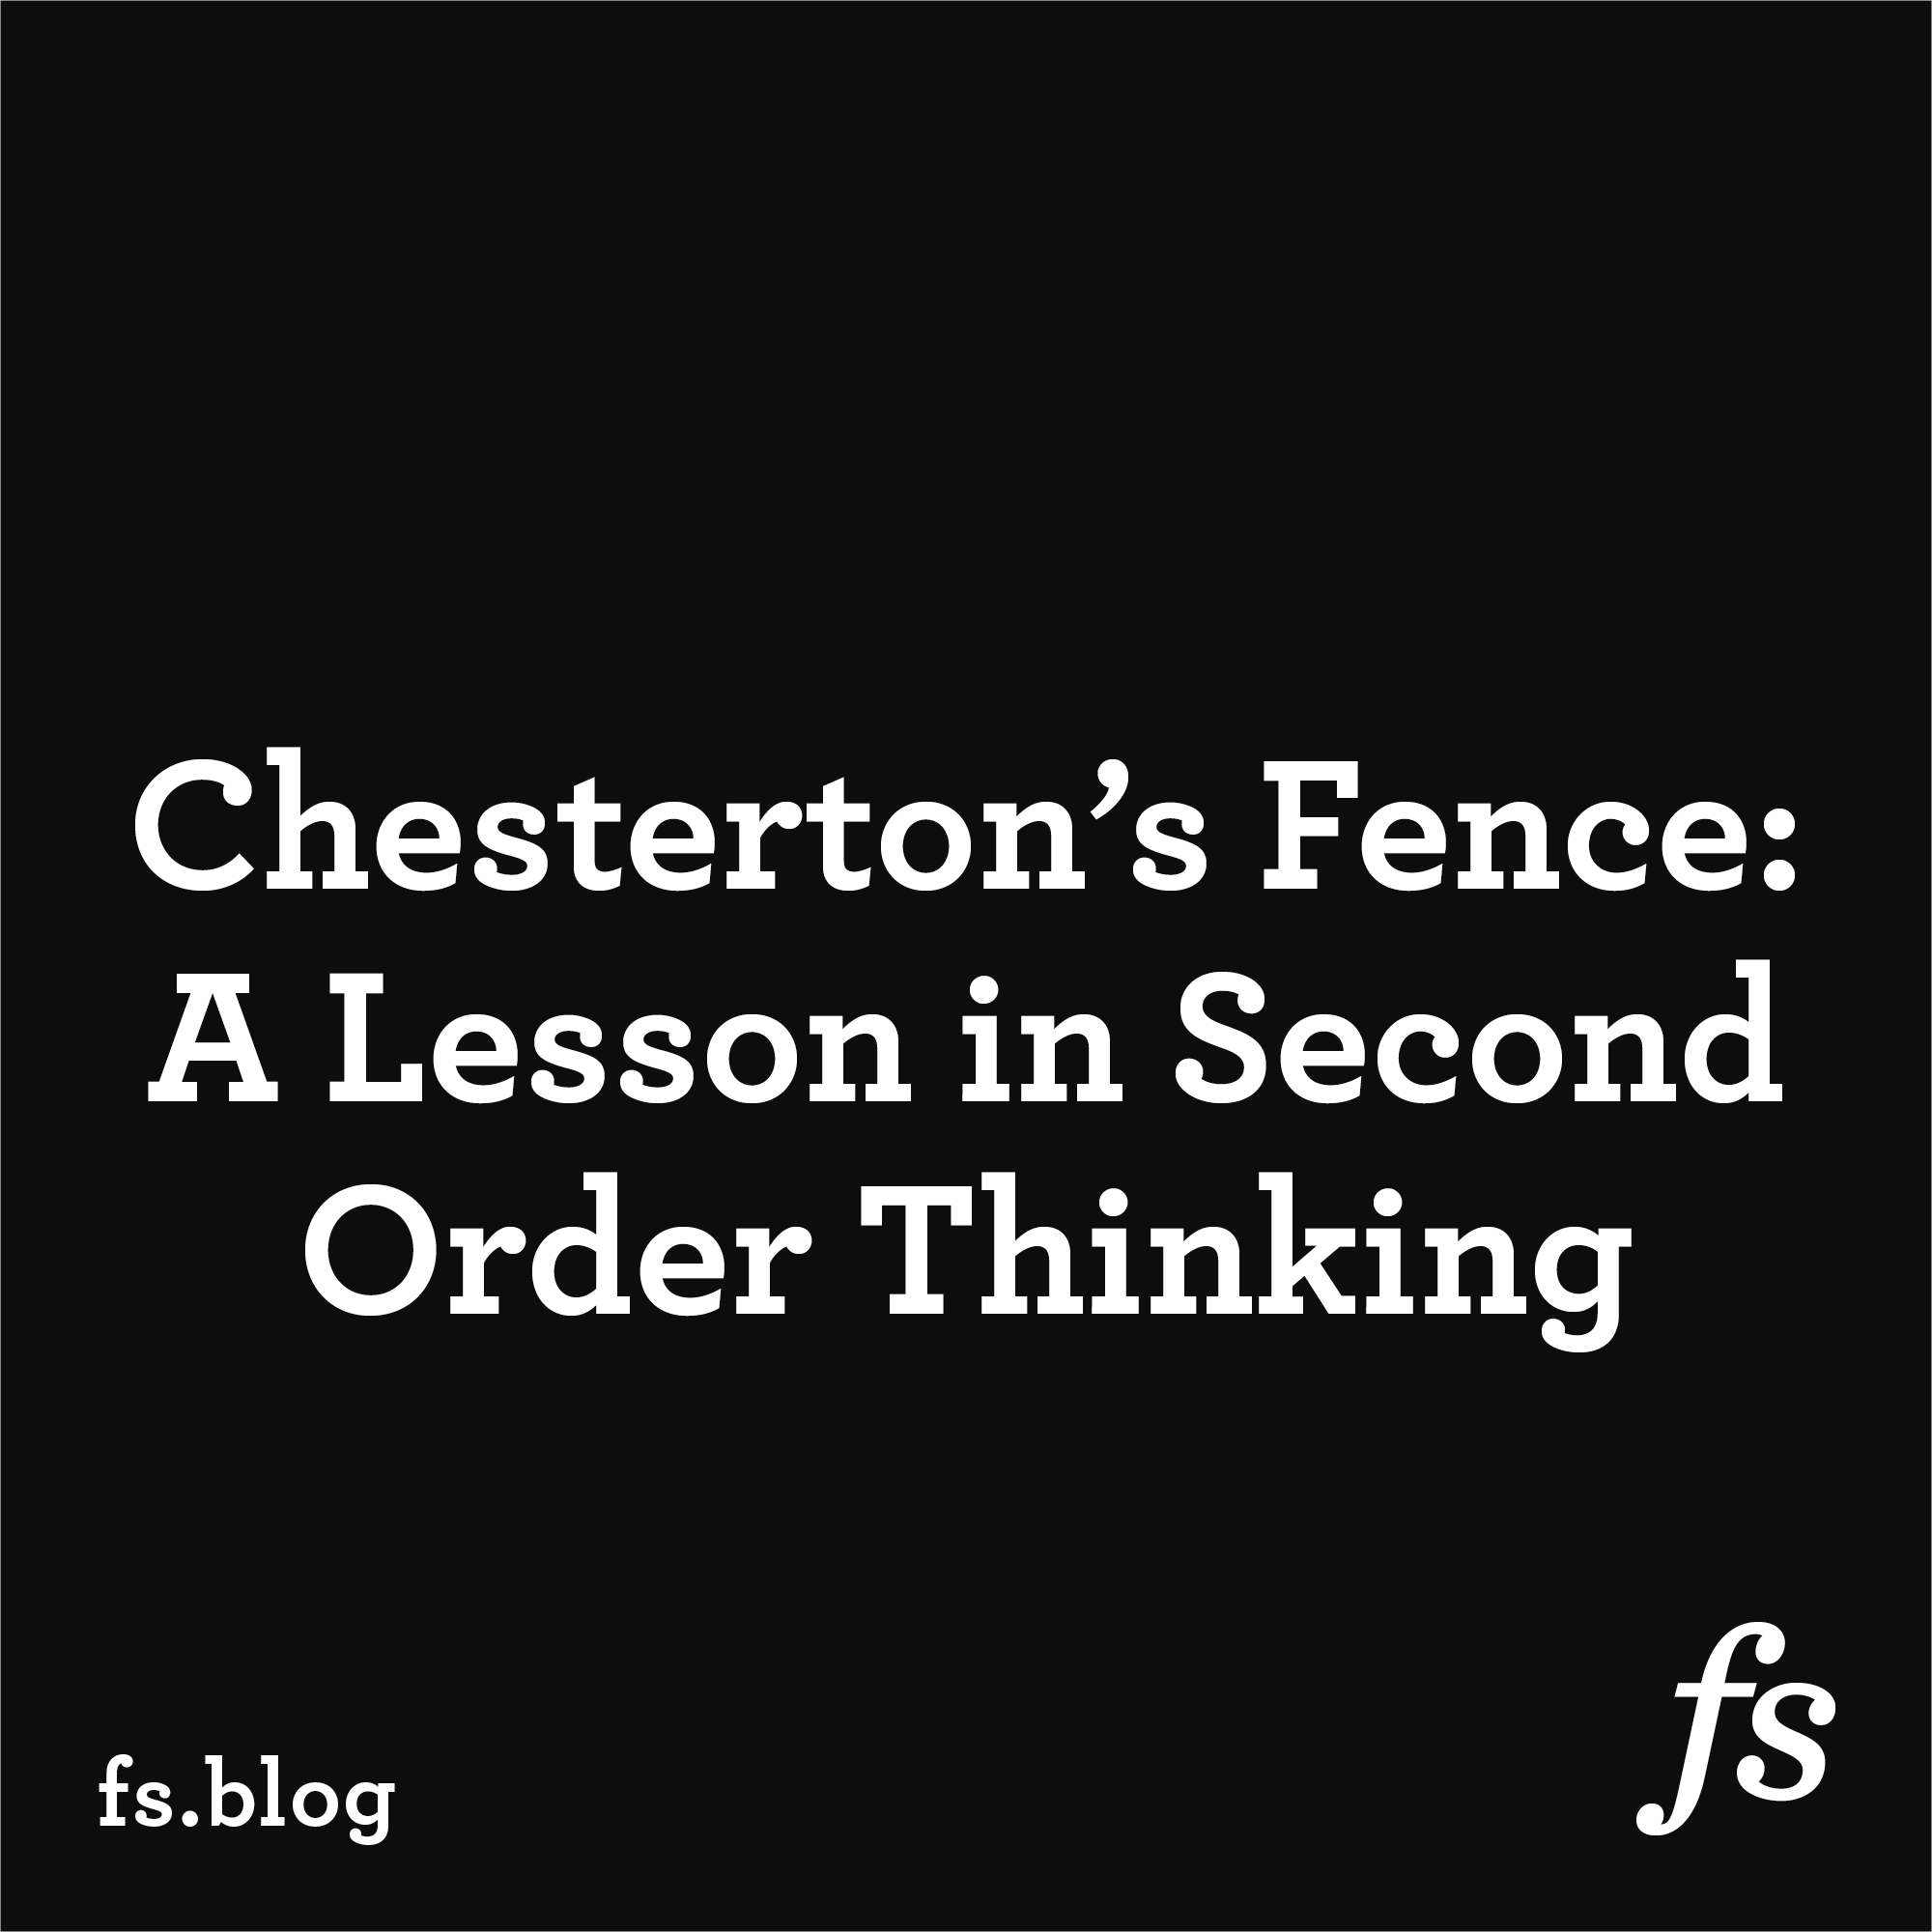 Chesterton’s Fence: A Lesson in Second Order Thinking - Farnam Street